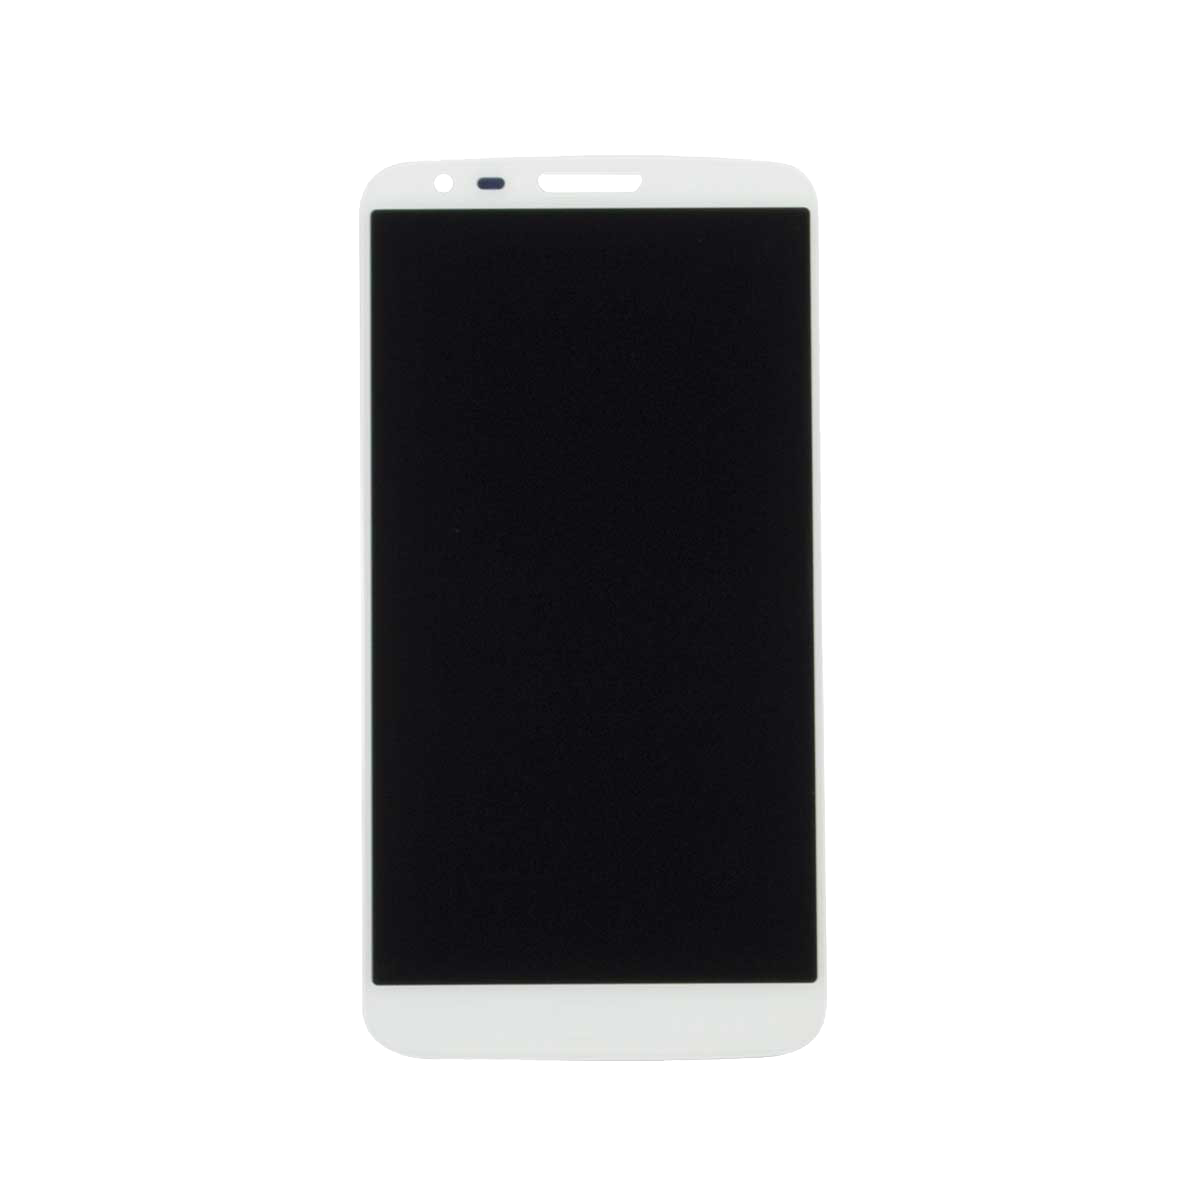 Clear Heavy Duty Case With Logo Hole For iPhone 7 Plus / 8 Plus (Without Clip)